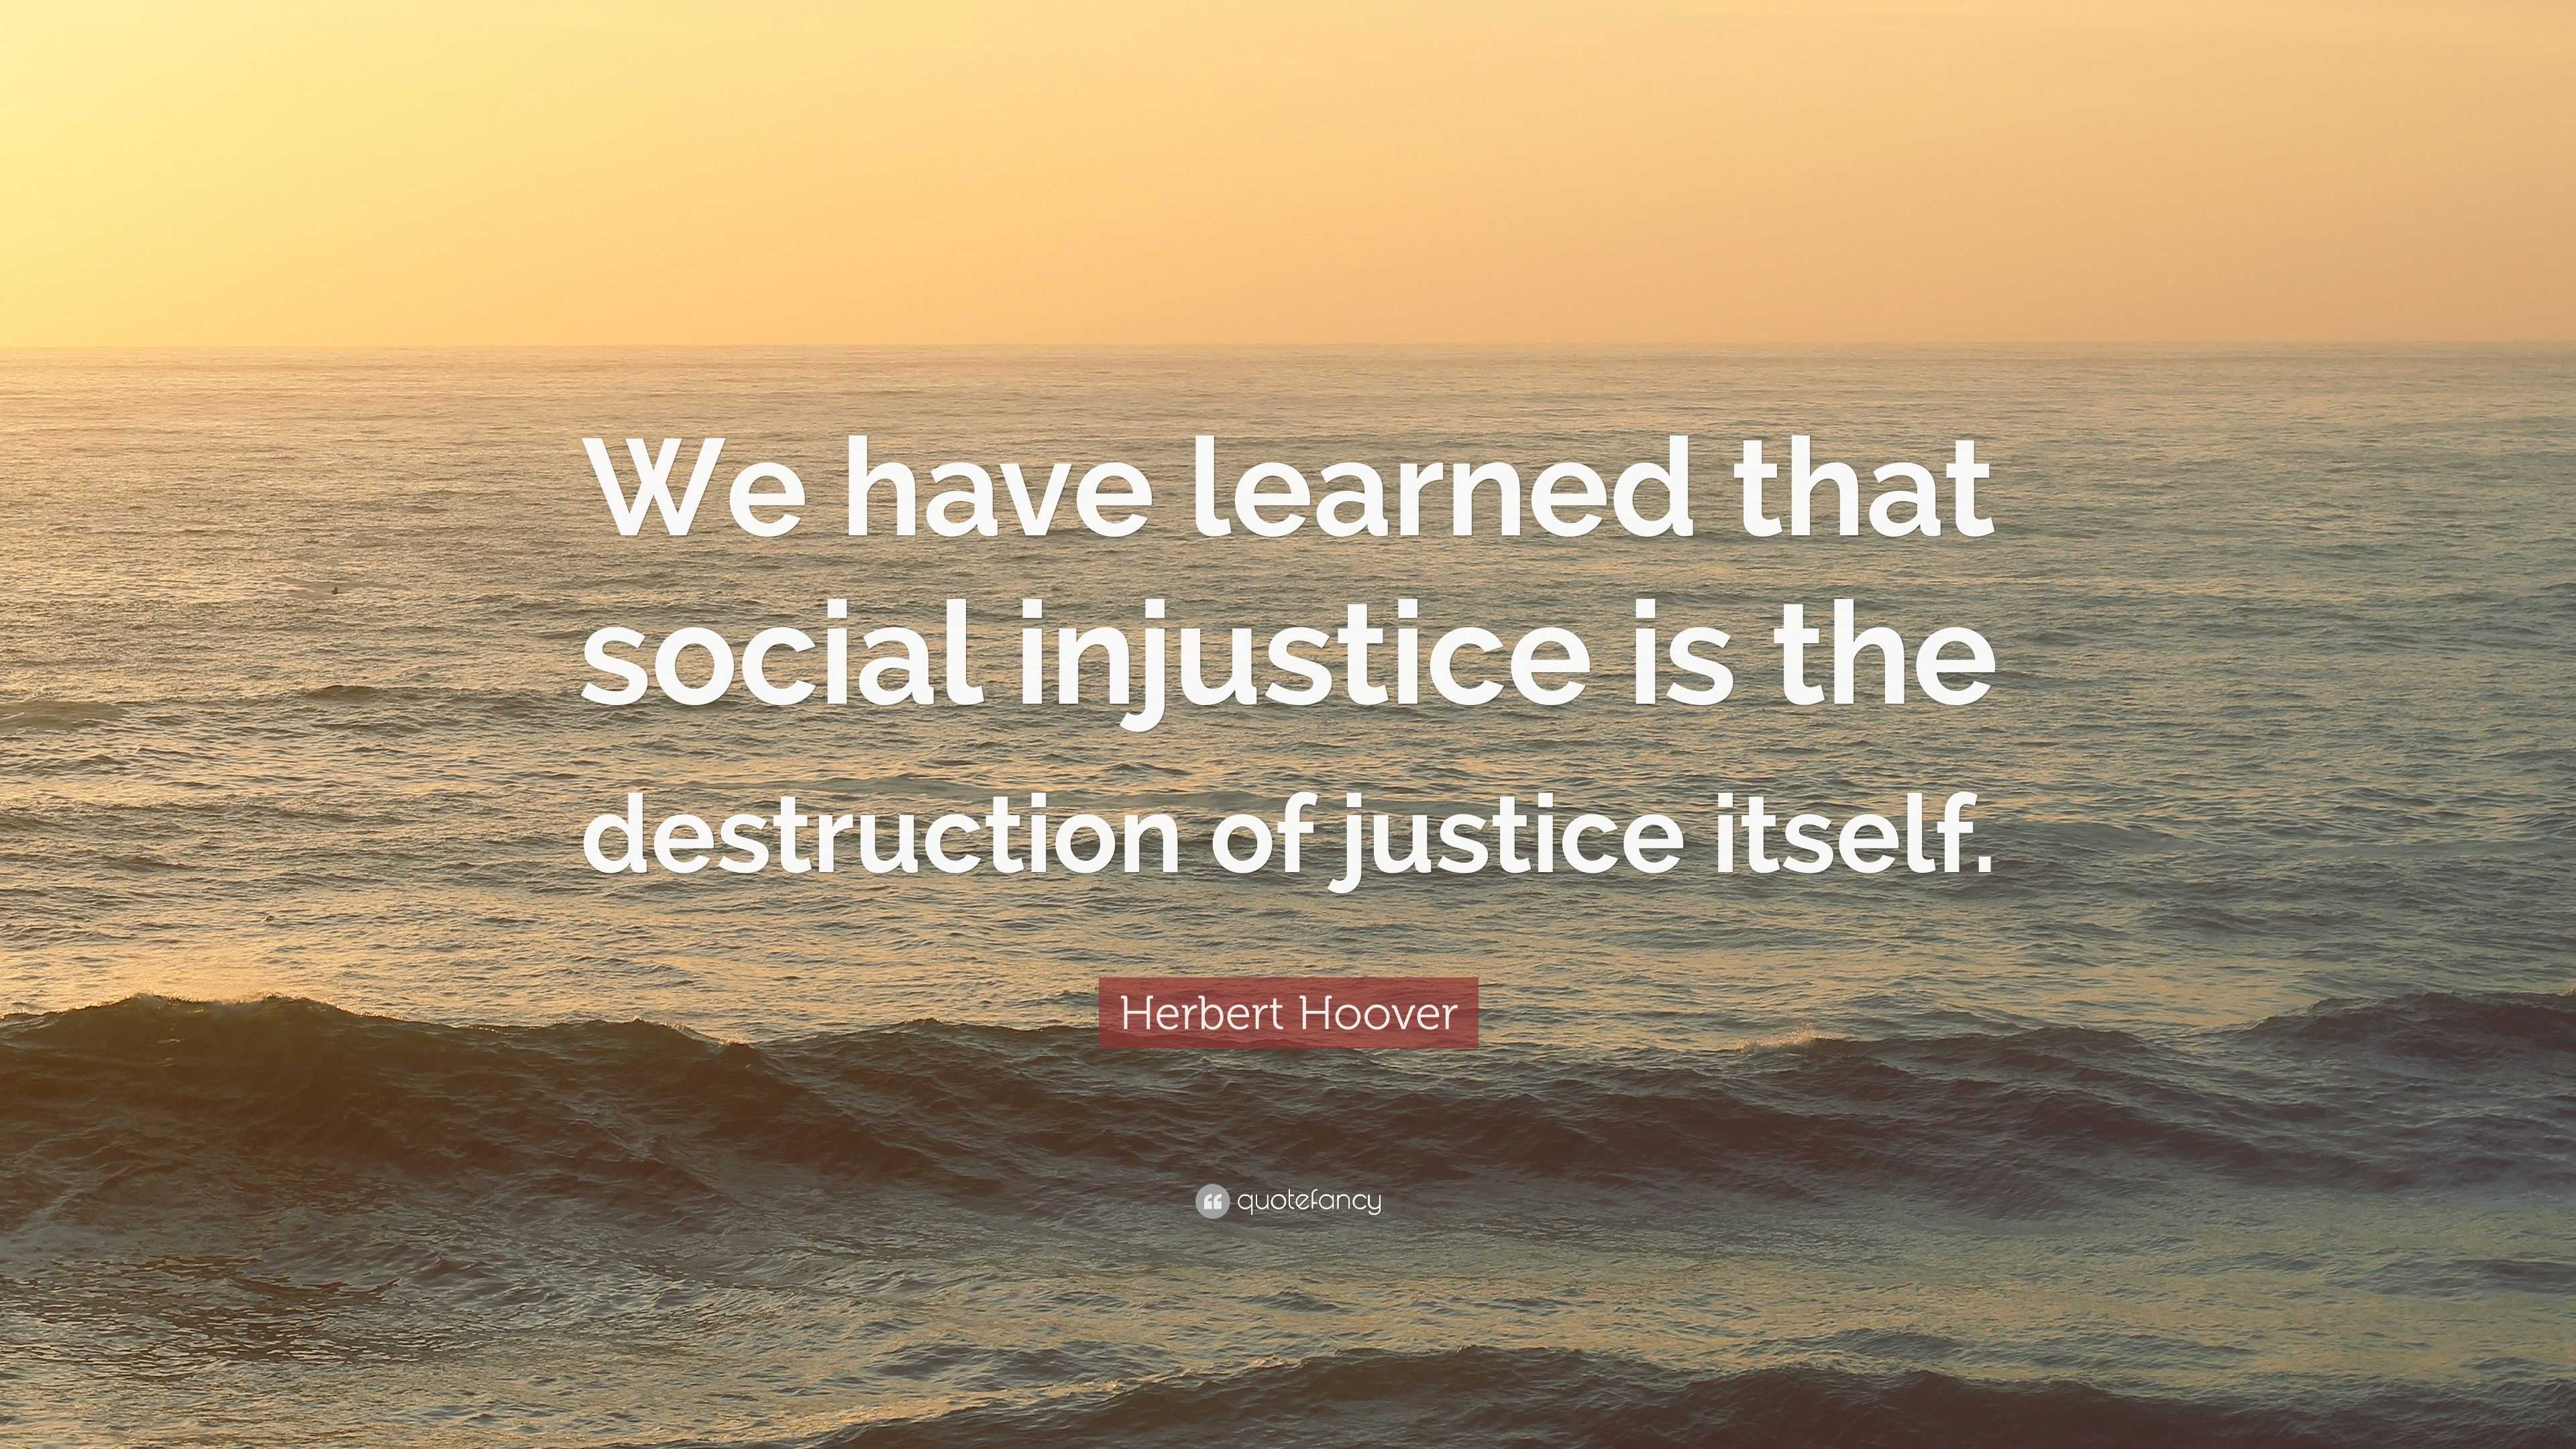 Herbert Hoover Quote “We have learned that social